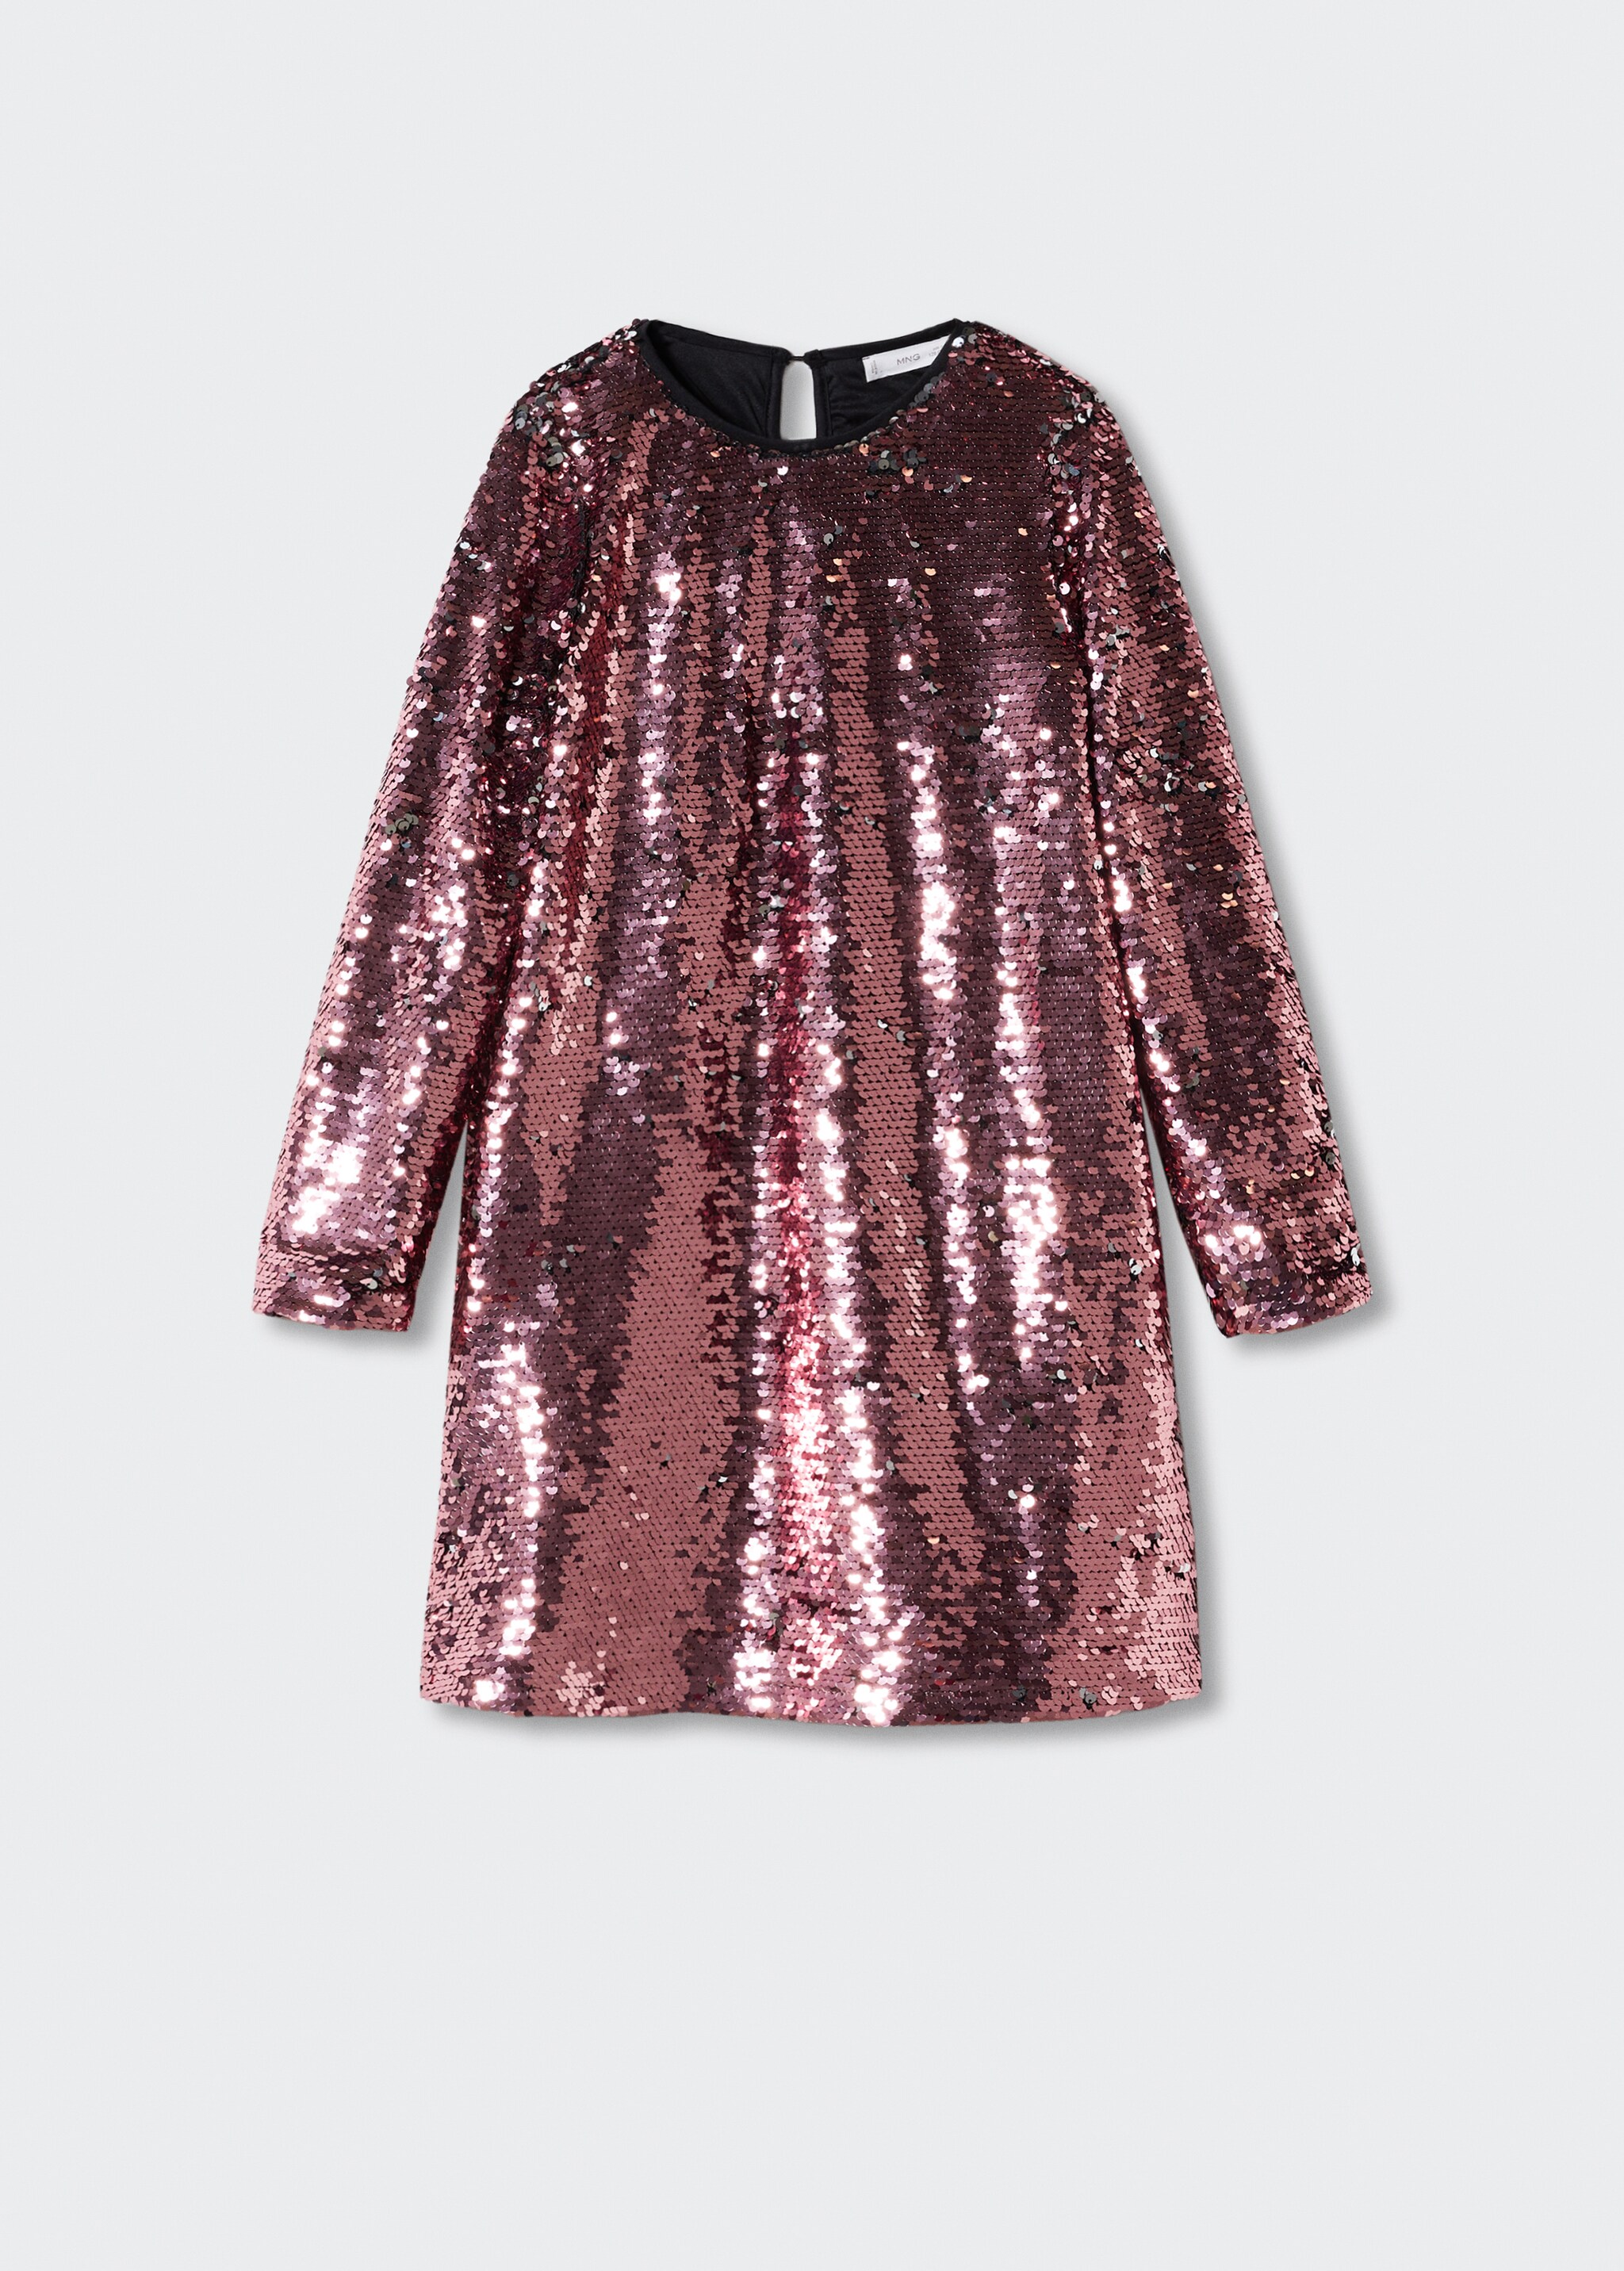 Reversible sequins dress - Article without model